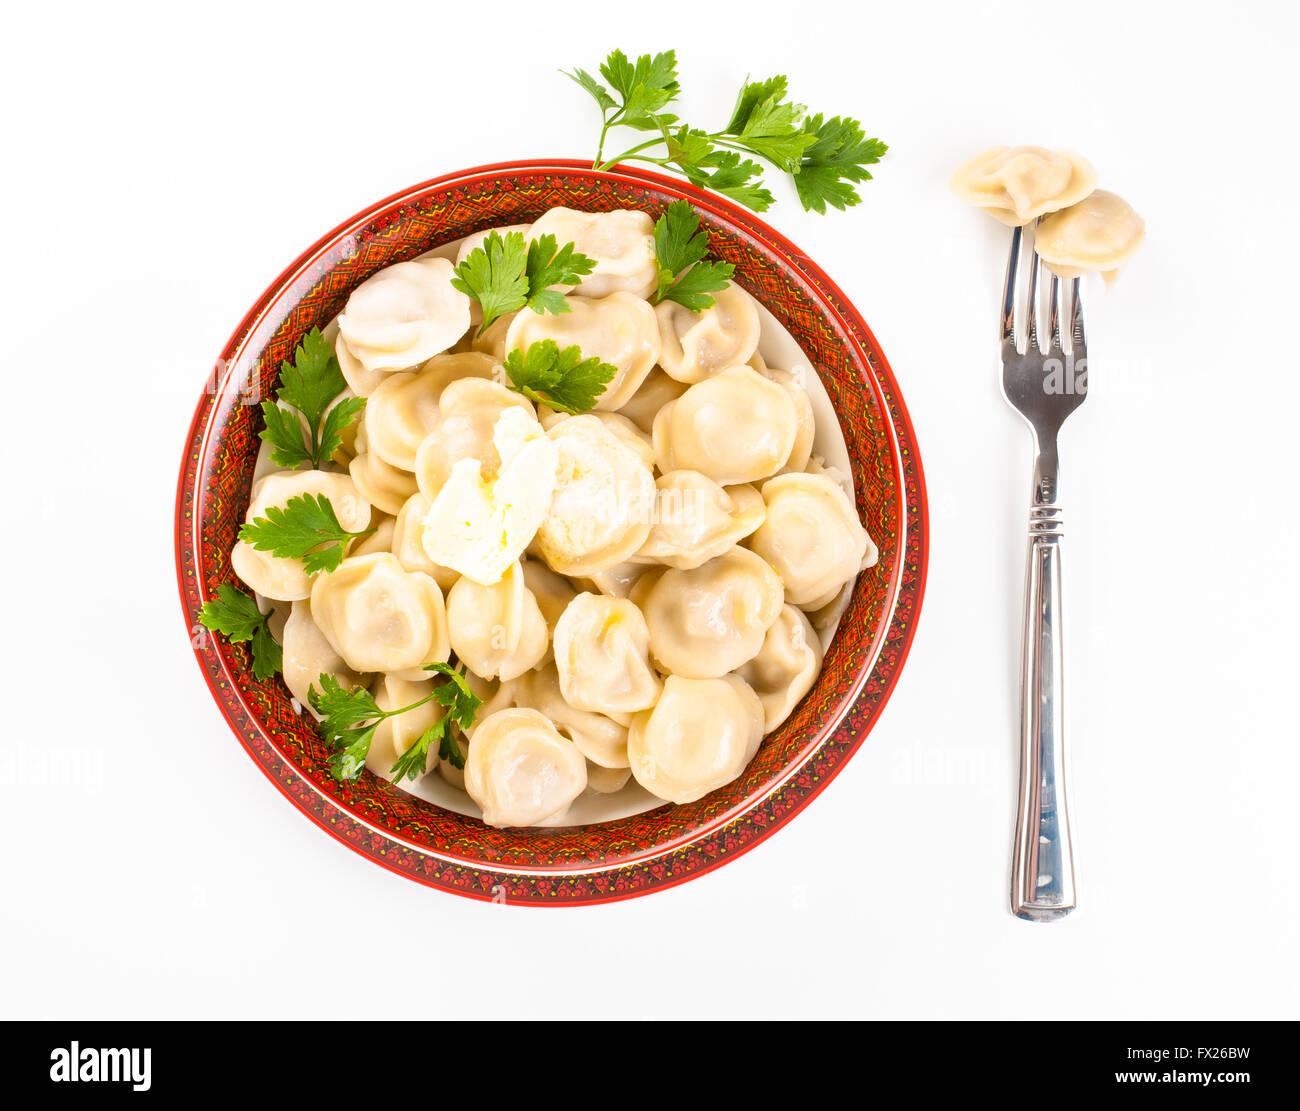 dumplings in a plate with a parsley and butter Stock Photo